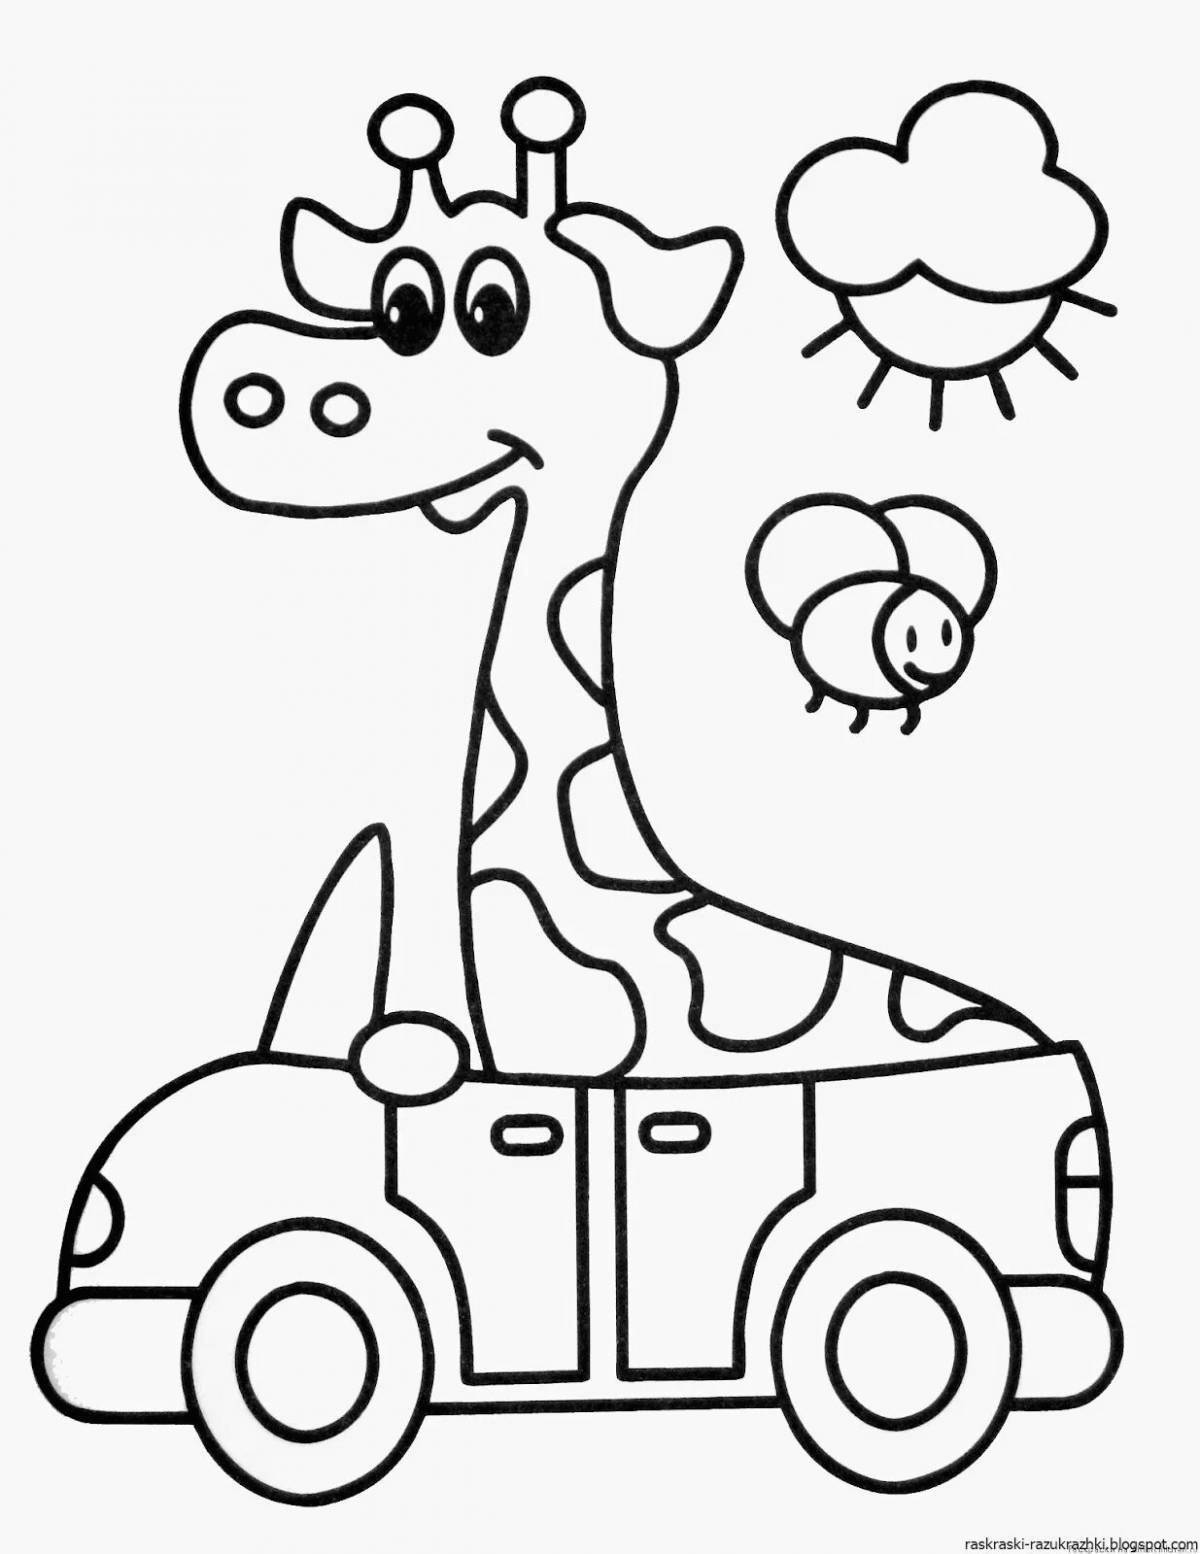 Glowing cars coloring book for 2 year olds